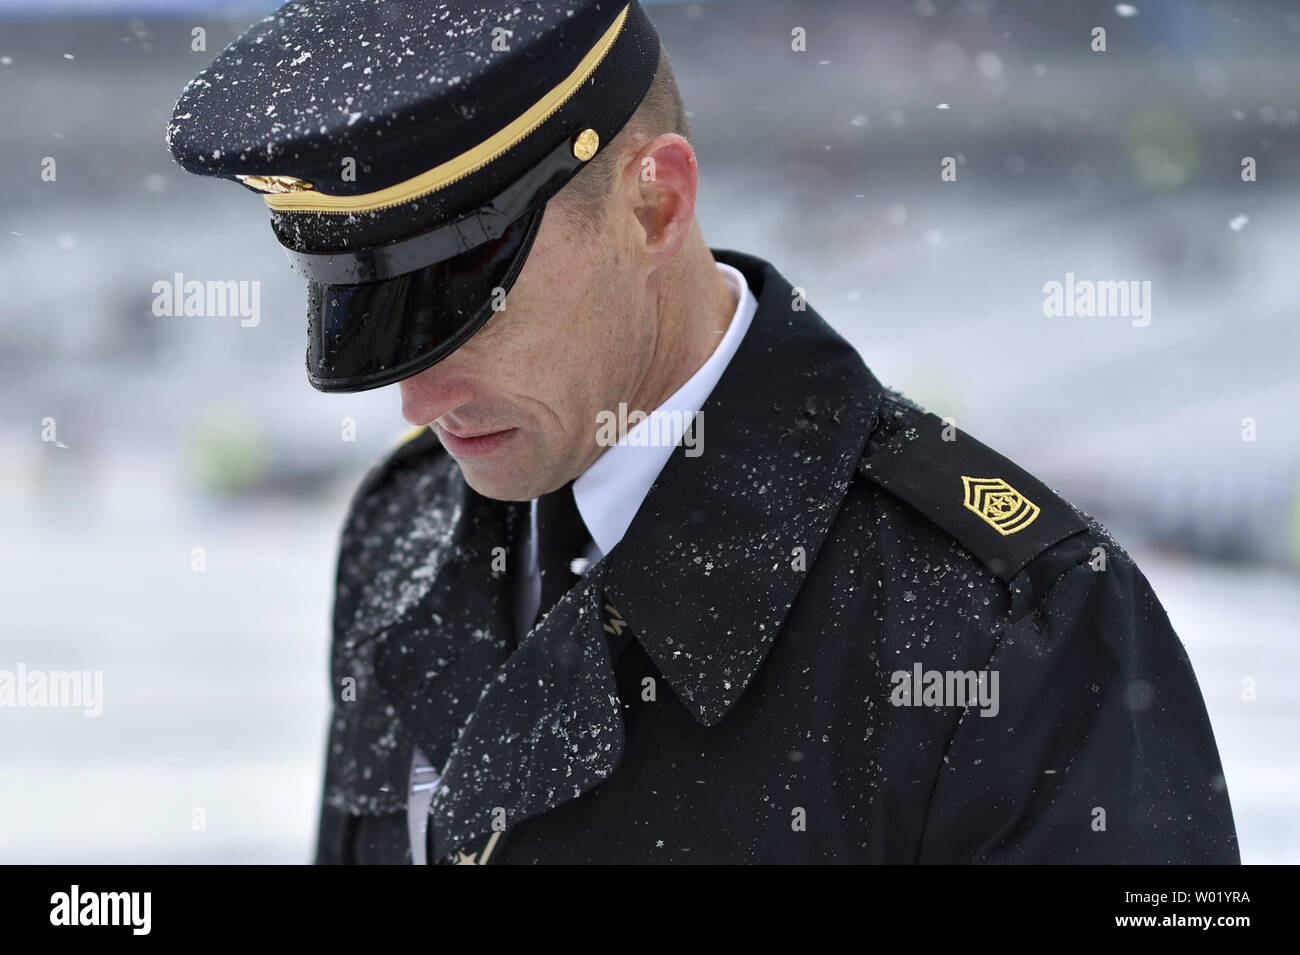 Snow falls on the shoulders of a Naval officer at the 118th meeting between Army and Navy at Lincoln Financial Field in Philadelphia, Pennsylvania on December 9, 2017. The Army-Navy Game is an American college rivalry game in college football between the Army Black Knights of the United States Military Academy (USMA) at West Point, New York, and the Navy Midshipmen of the United States Naval Academy (USNA) at Annapolis, Maryland.      Photo by Derik Hamilton/UPI Stock Photo